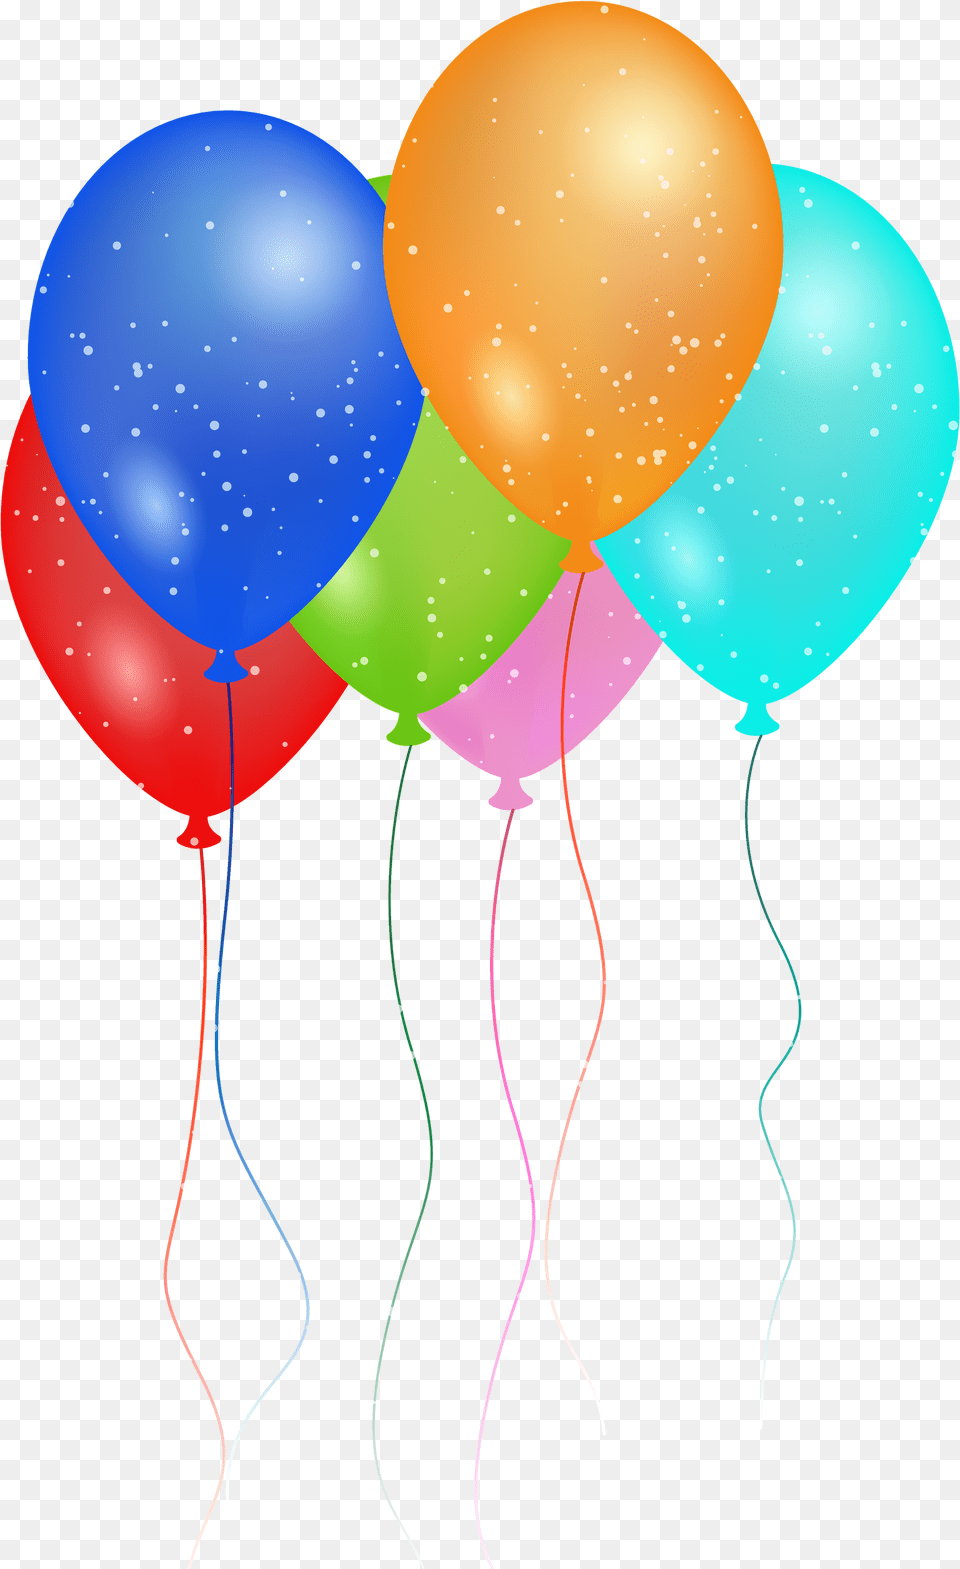 Birthday Party Balloon Icons And Happy Birthday Party Balloons Free Transparent Png